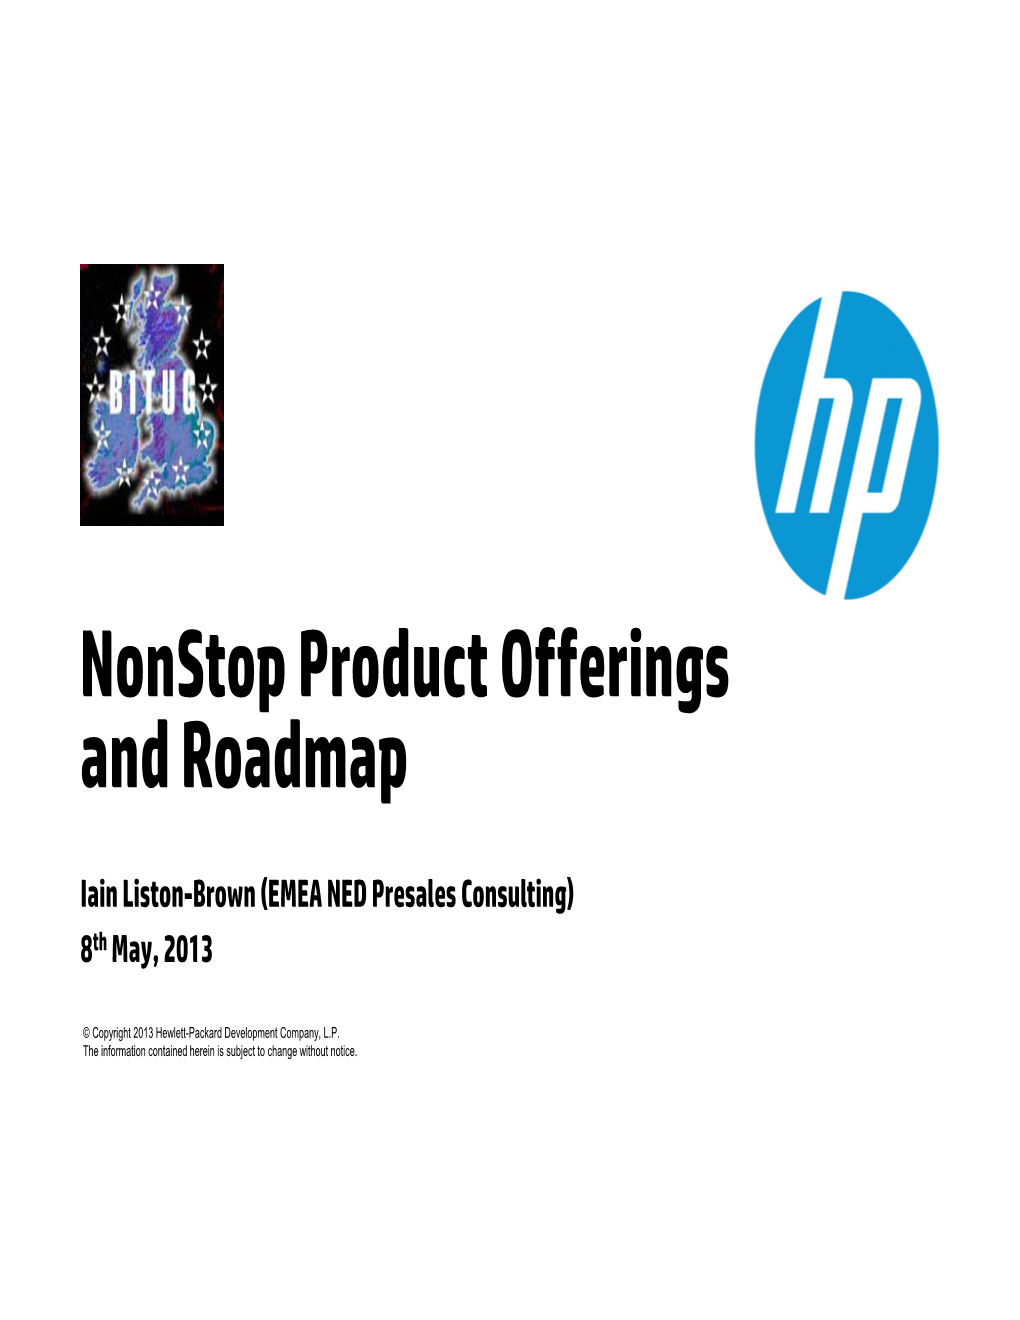 Nonstop Product Offerings and Roadmap